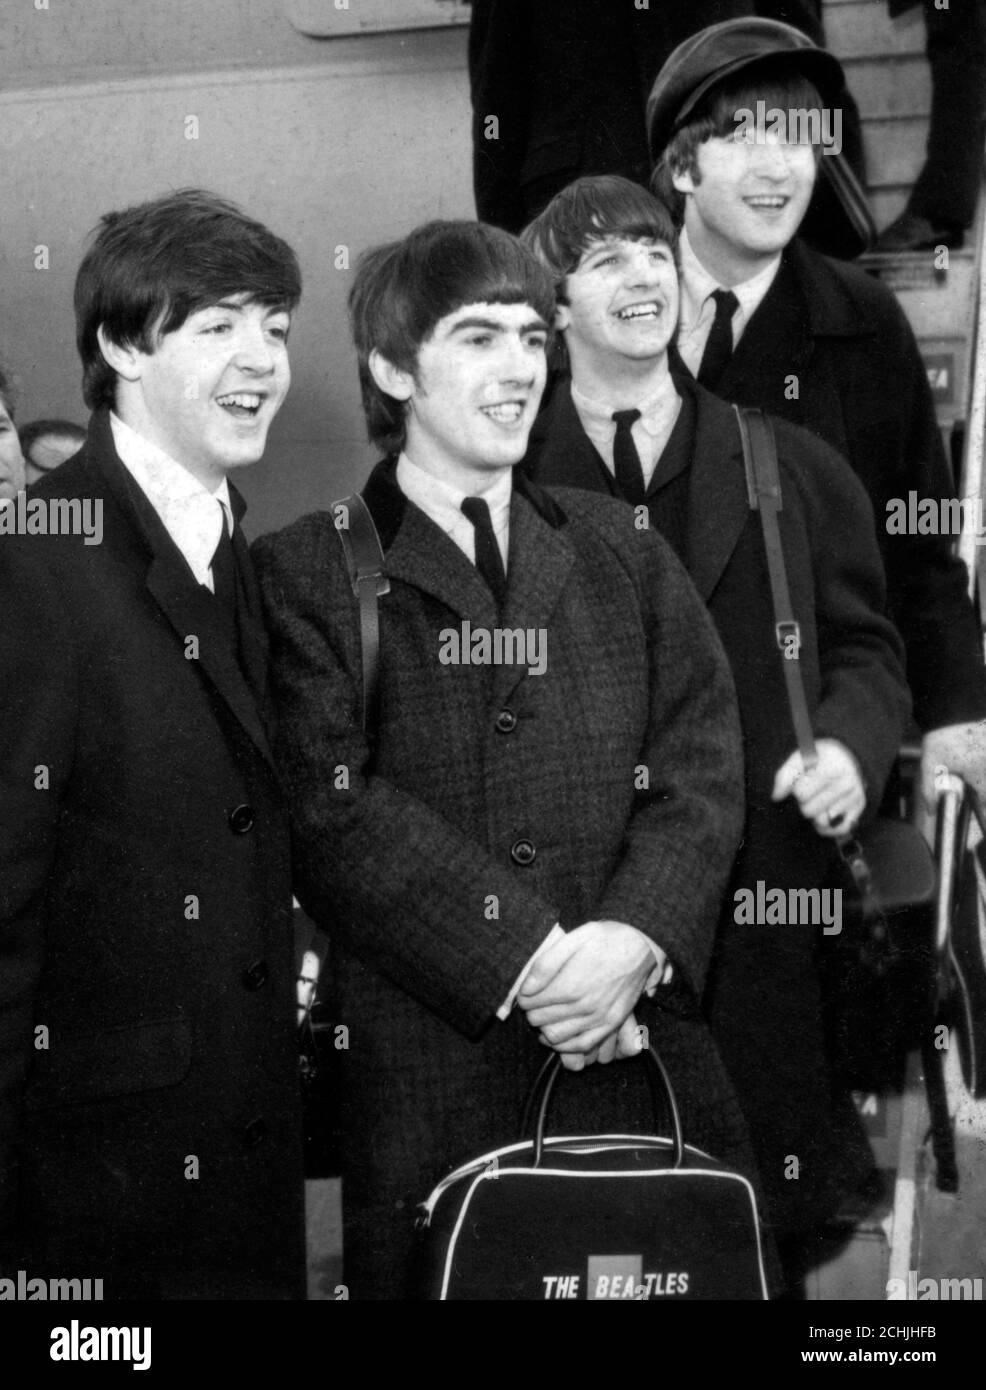 The Beatles leave the plane on arrival at London Airport from their successful appearances in Paris. (L-R) Paul McCartney, George Harrison, Ringo Starr and John Lennon. Screaming fans greeted their return. *SCANNED FROM CONTACT, NEG MISSING Stock Photo